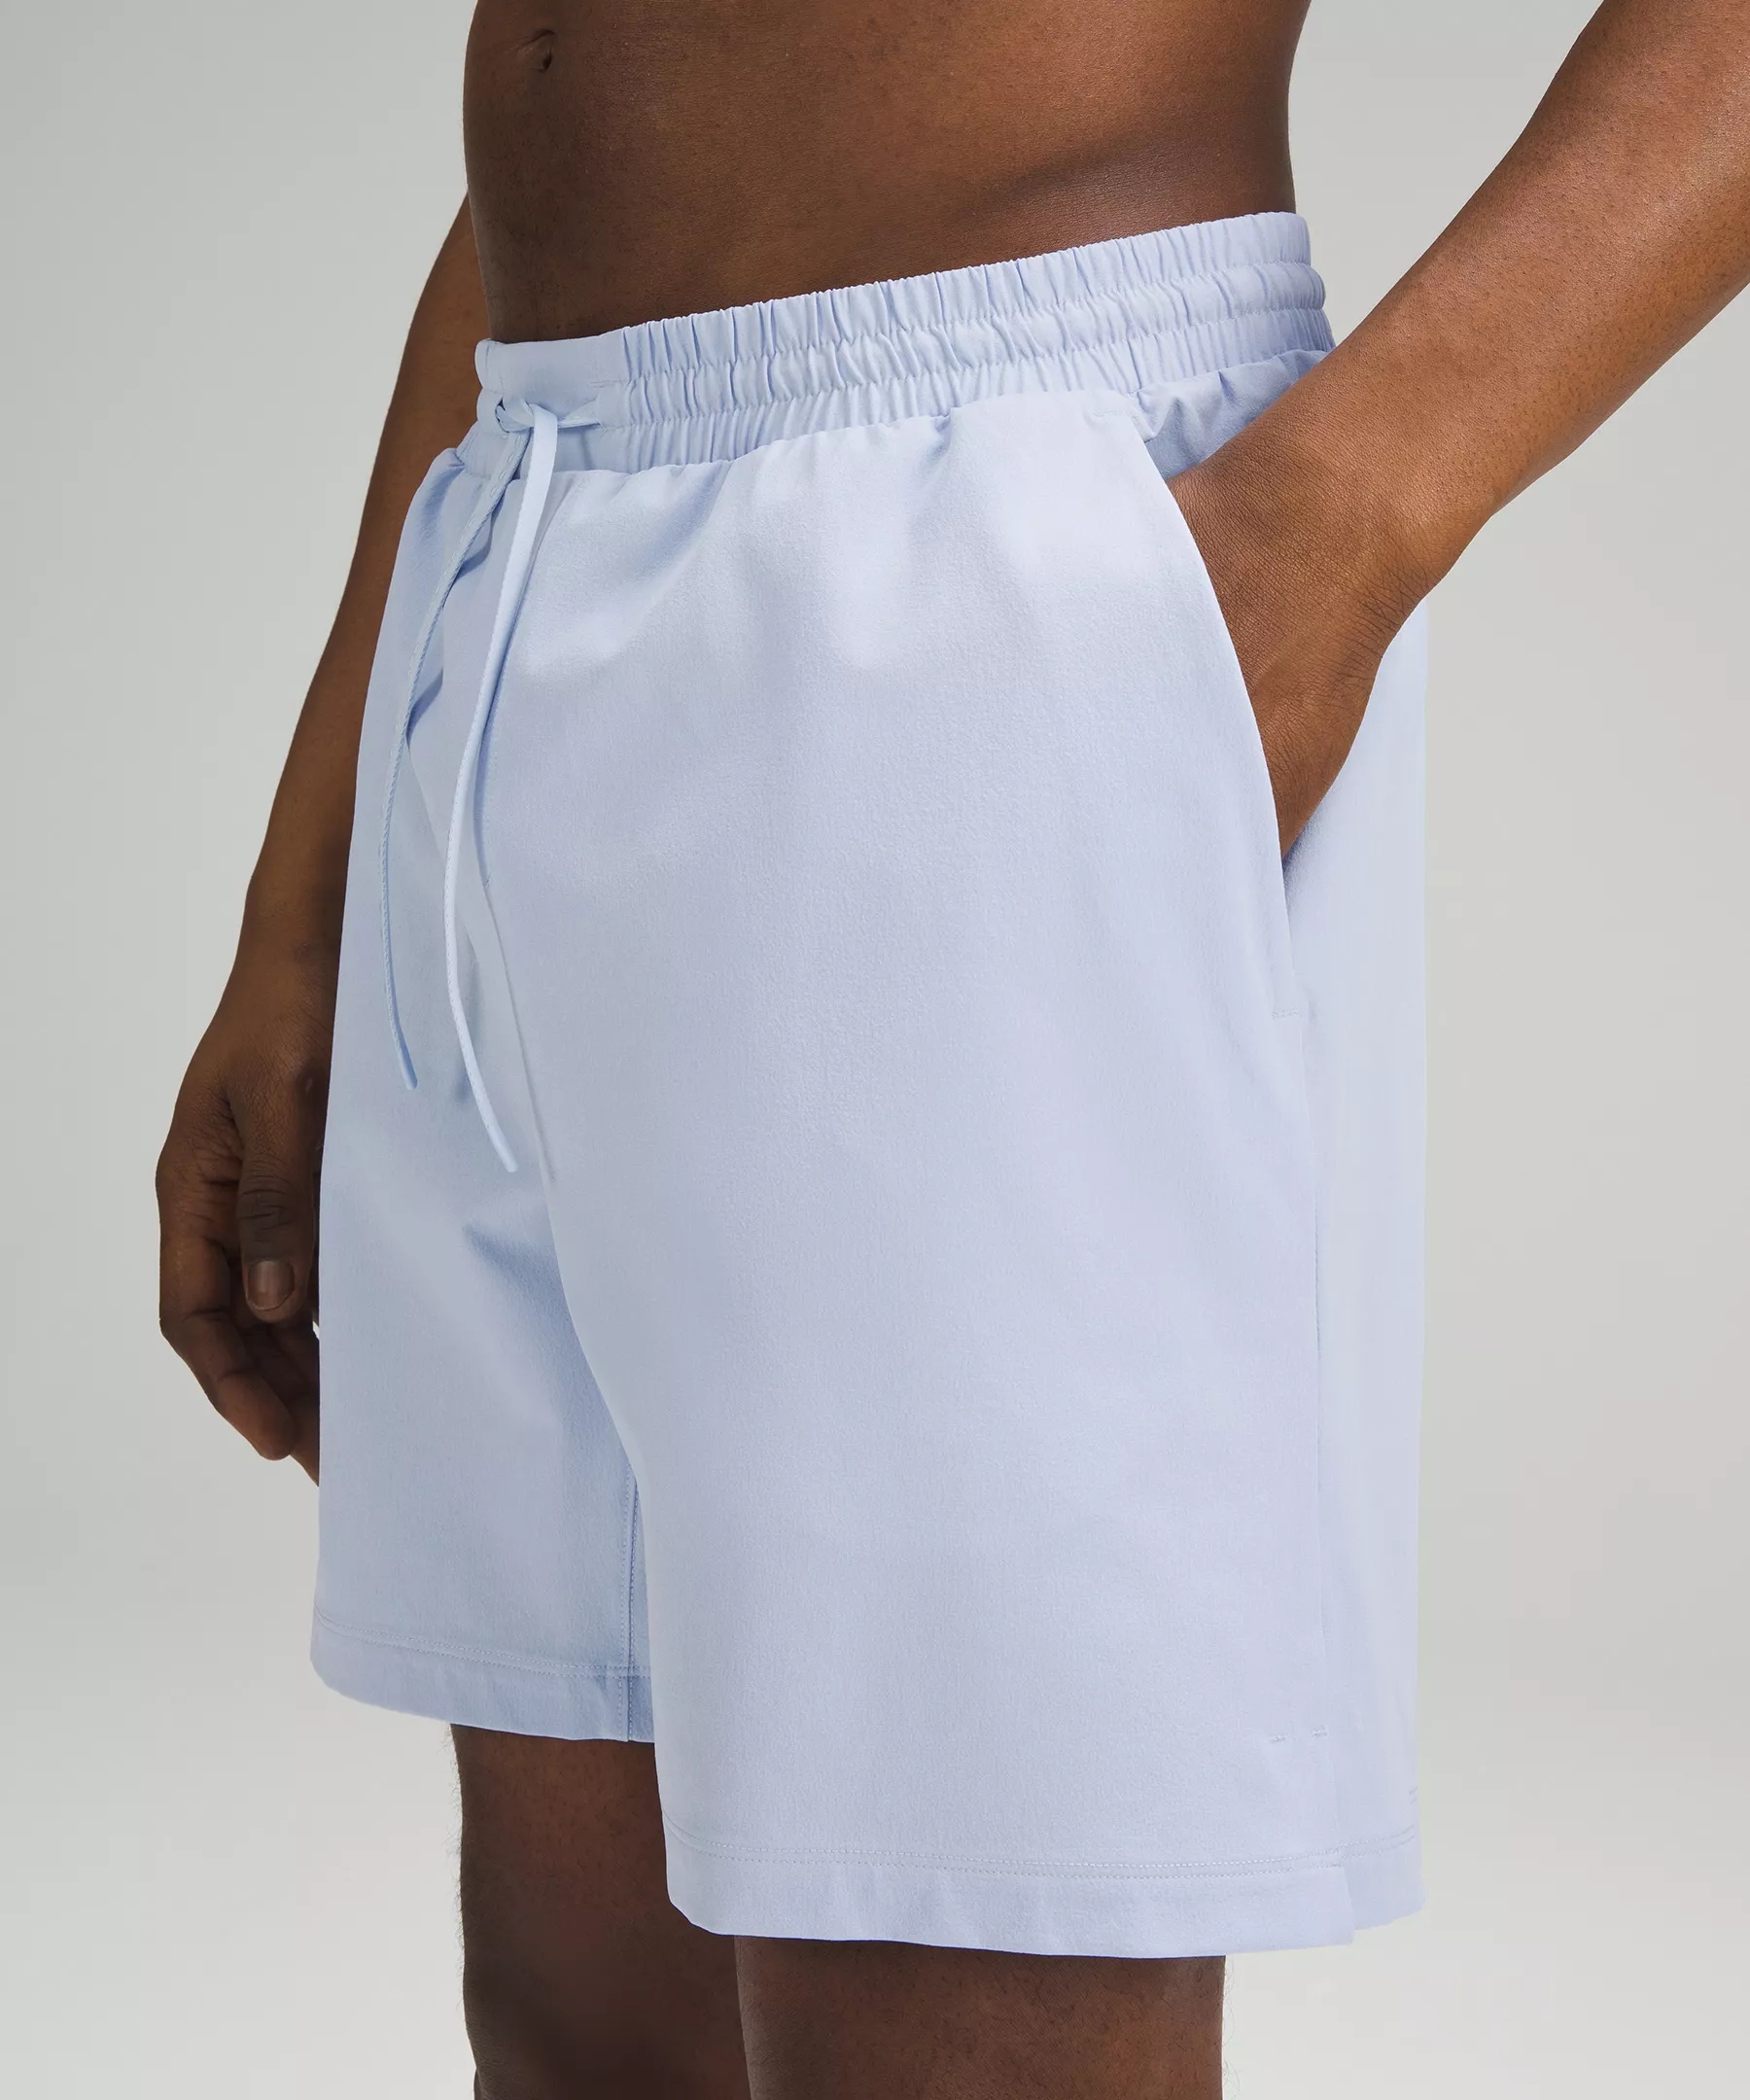 Pool Short 7" *Lined - 4